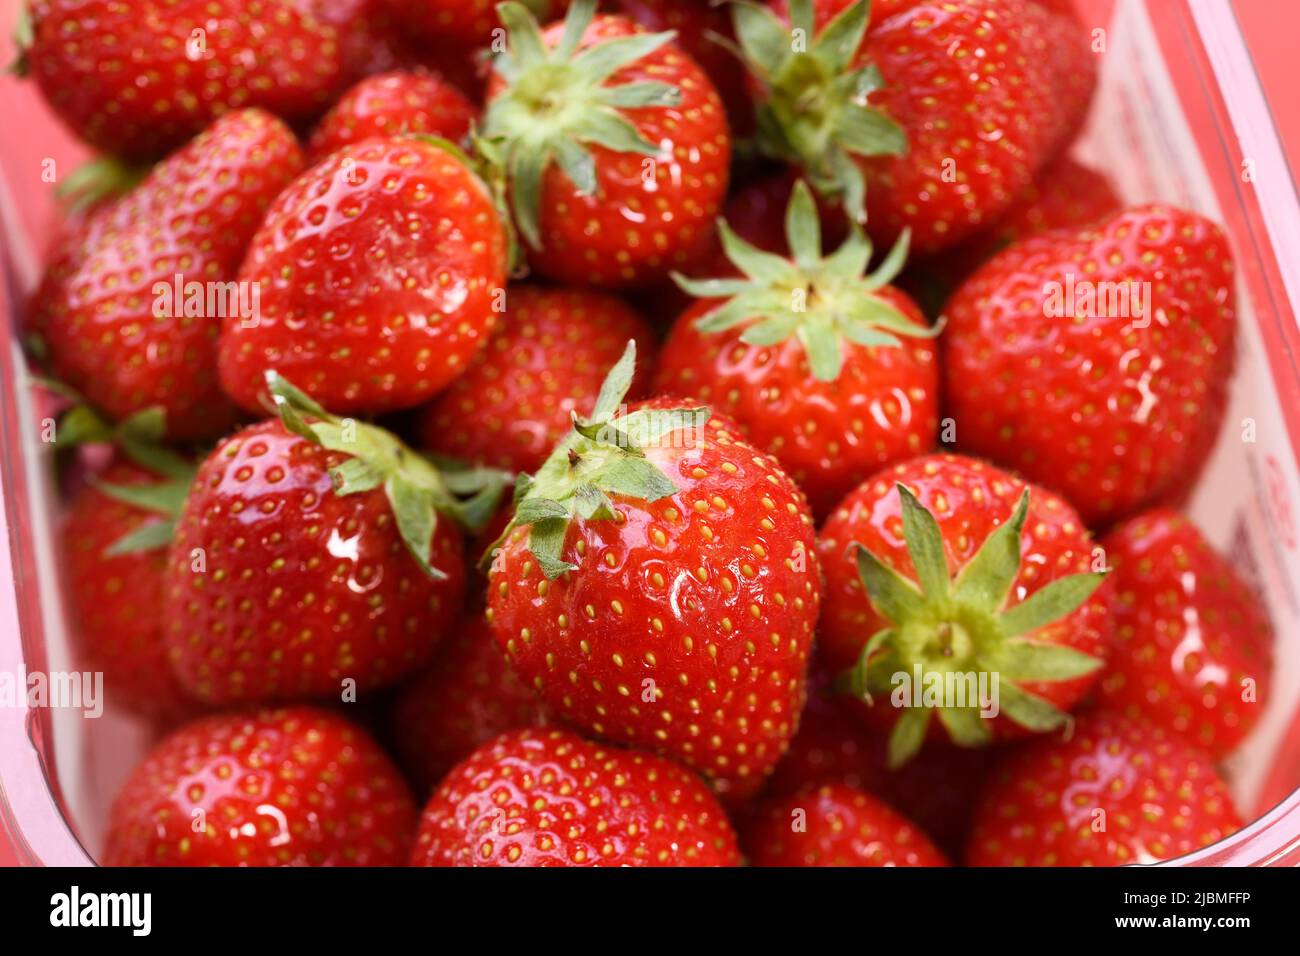 Close up detail of ripe strawberries in a plastic punnet Stock Photo